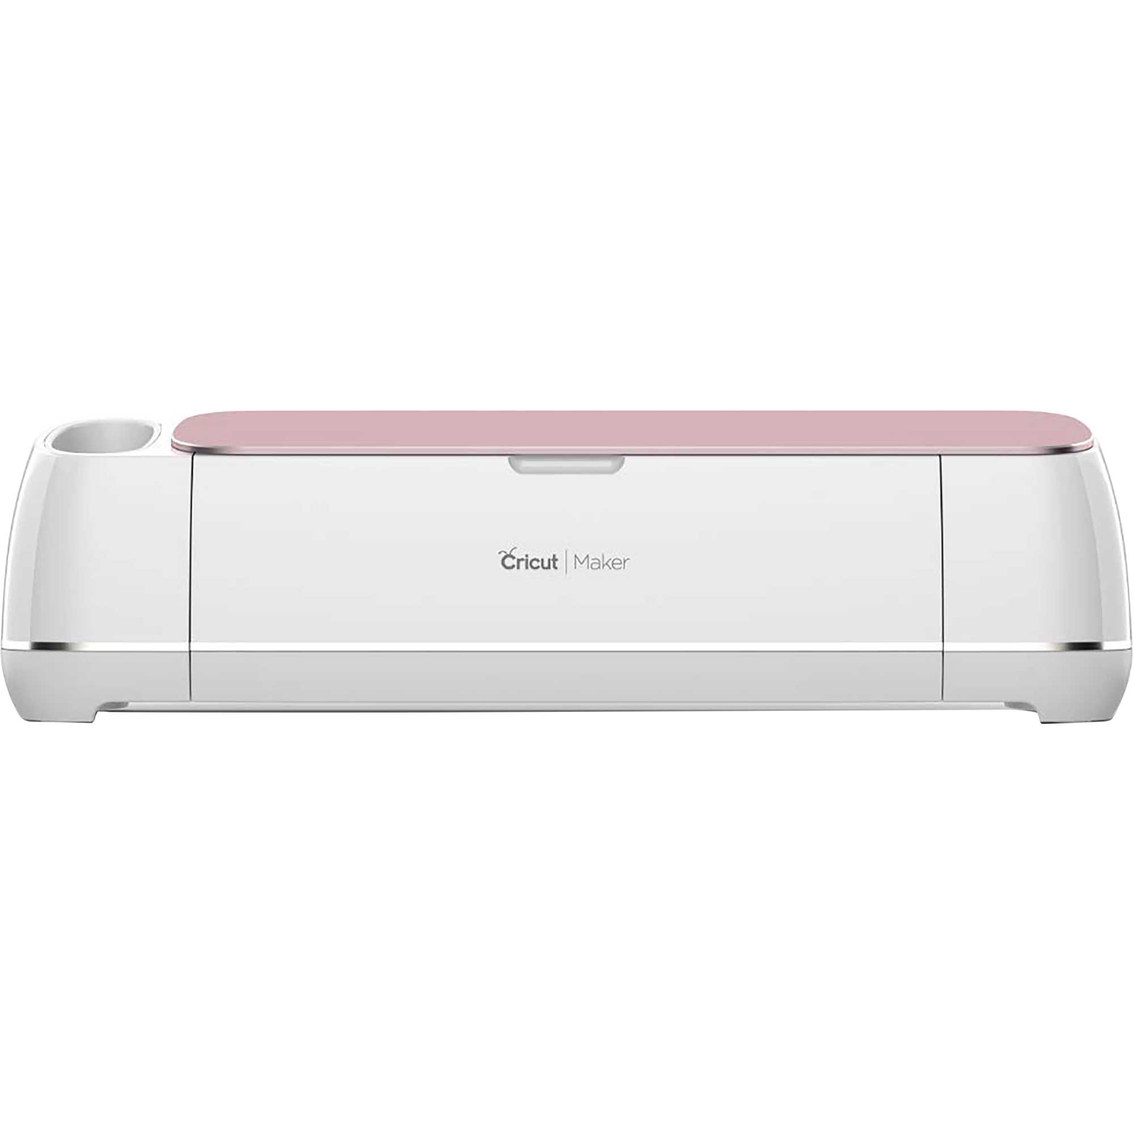 Cricut Explore Air 2 Machine: Its Functions and Accessories, by  cricutmakeronline